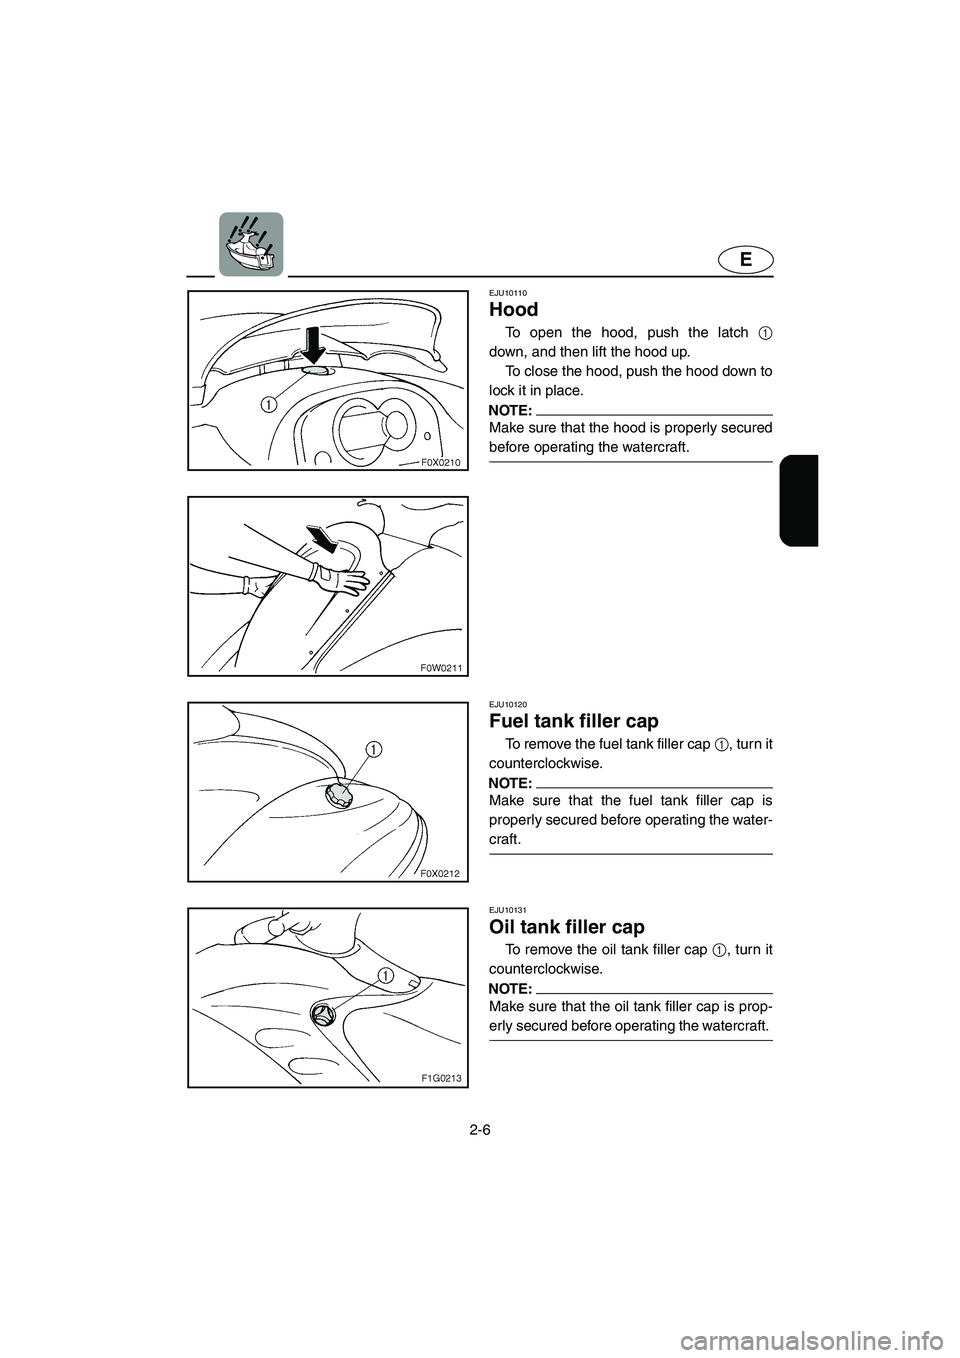 YAMAHA GP1300R 2005  Owners Manual 2-6
E
EJU10110
Hood 
To open the hood, push the latch 1
down, and then lift the hood up. 
To close the hood, push the hood down to
lock it in place.
NOTE:@ Make sure that the hood is properly secured
